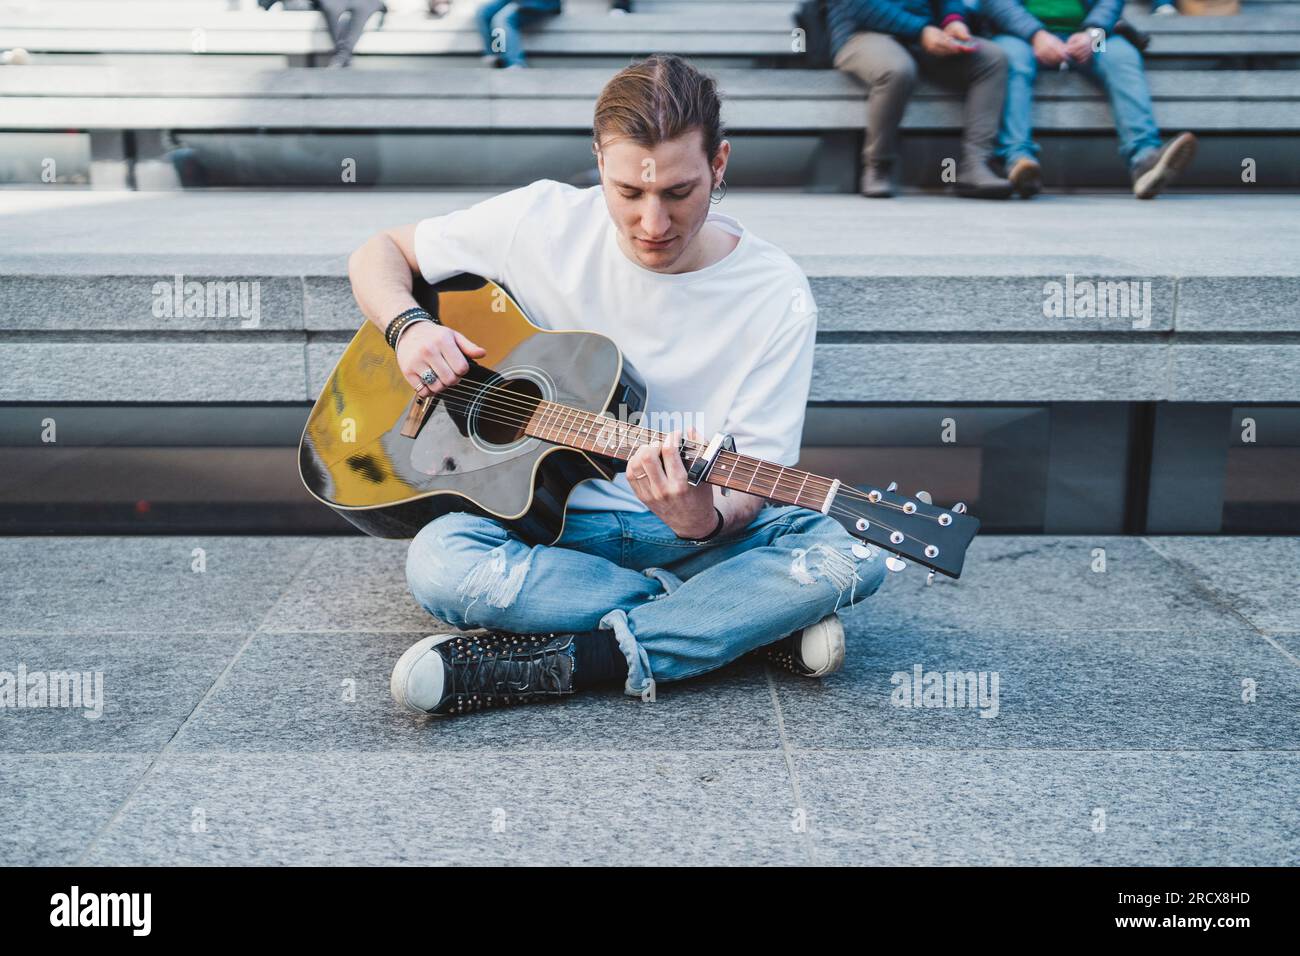 musician looking at the guitar sitting on the floor with people behind Stock Photo